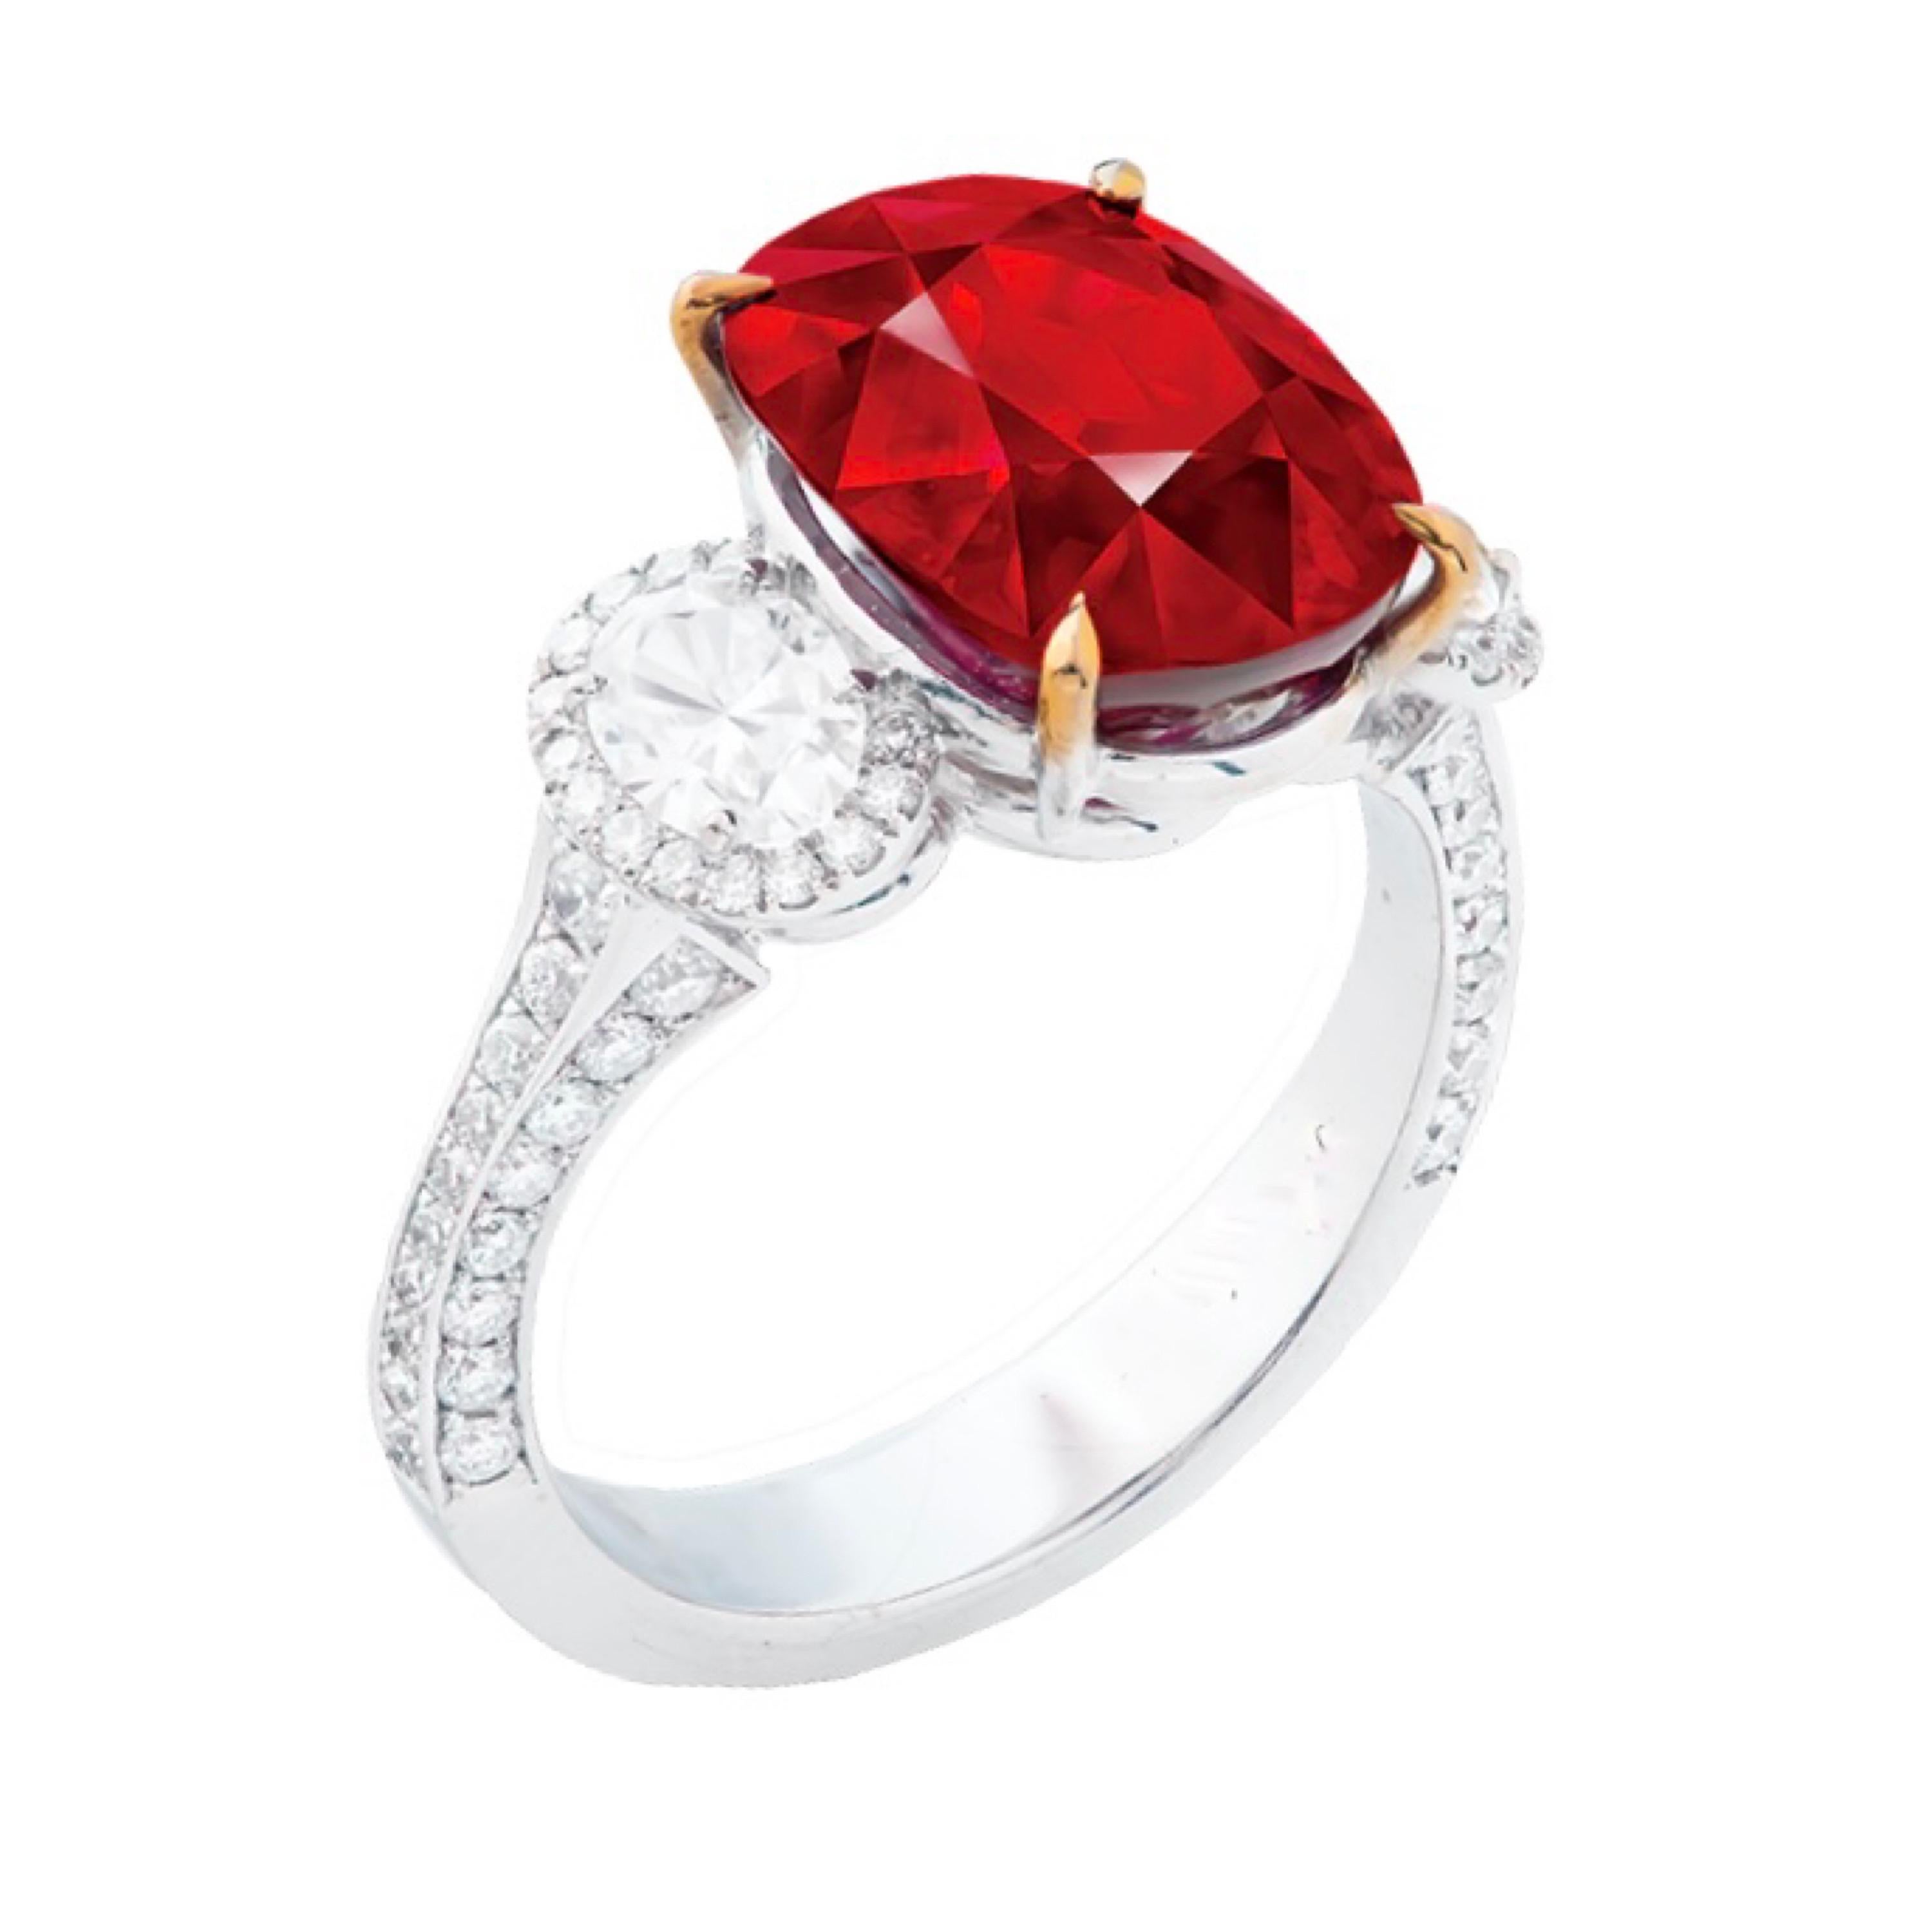 Main stone: 7.03 carats
Color: Vivid Red (PIGEON BLOOD) 
Shape: CUSHION
Setting: 39 white diamonds with a total of about 0.405 carats, 41 white diamonds with a total of about 0.182 carats, 2 fancy oval diamonds with a total of about 0.168